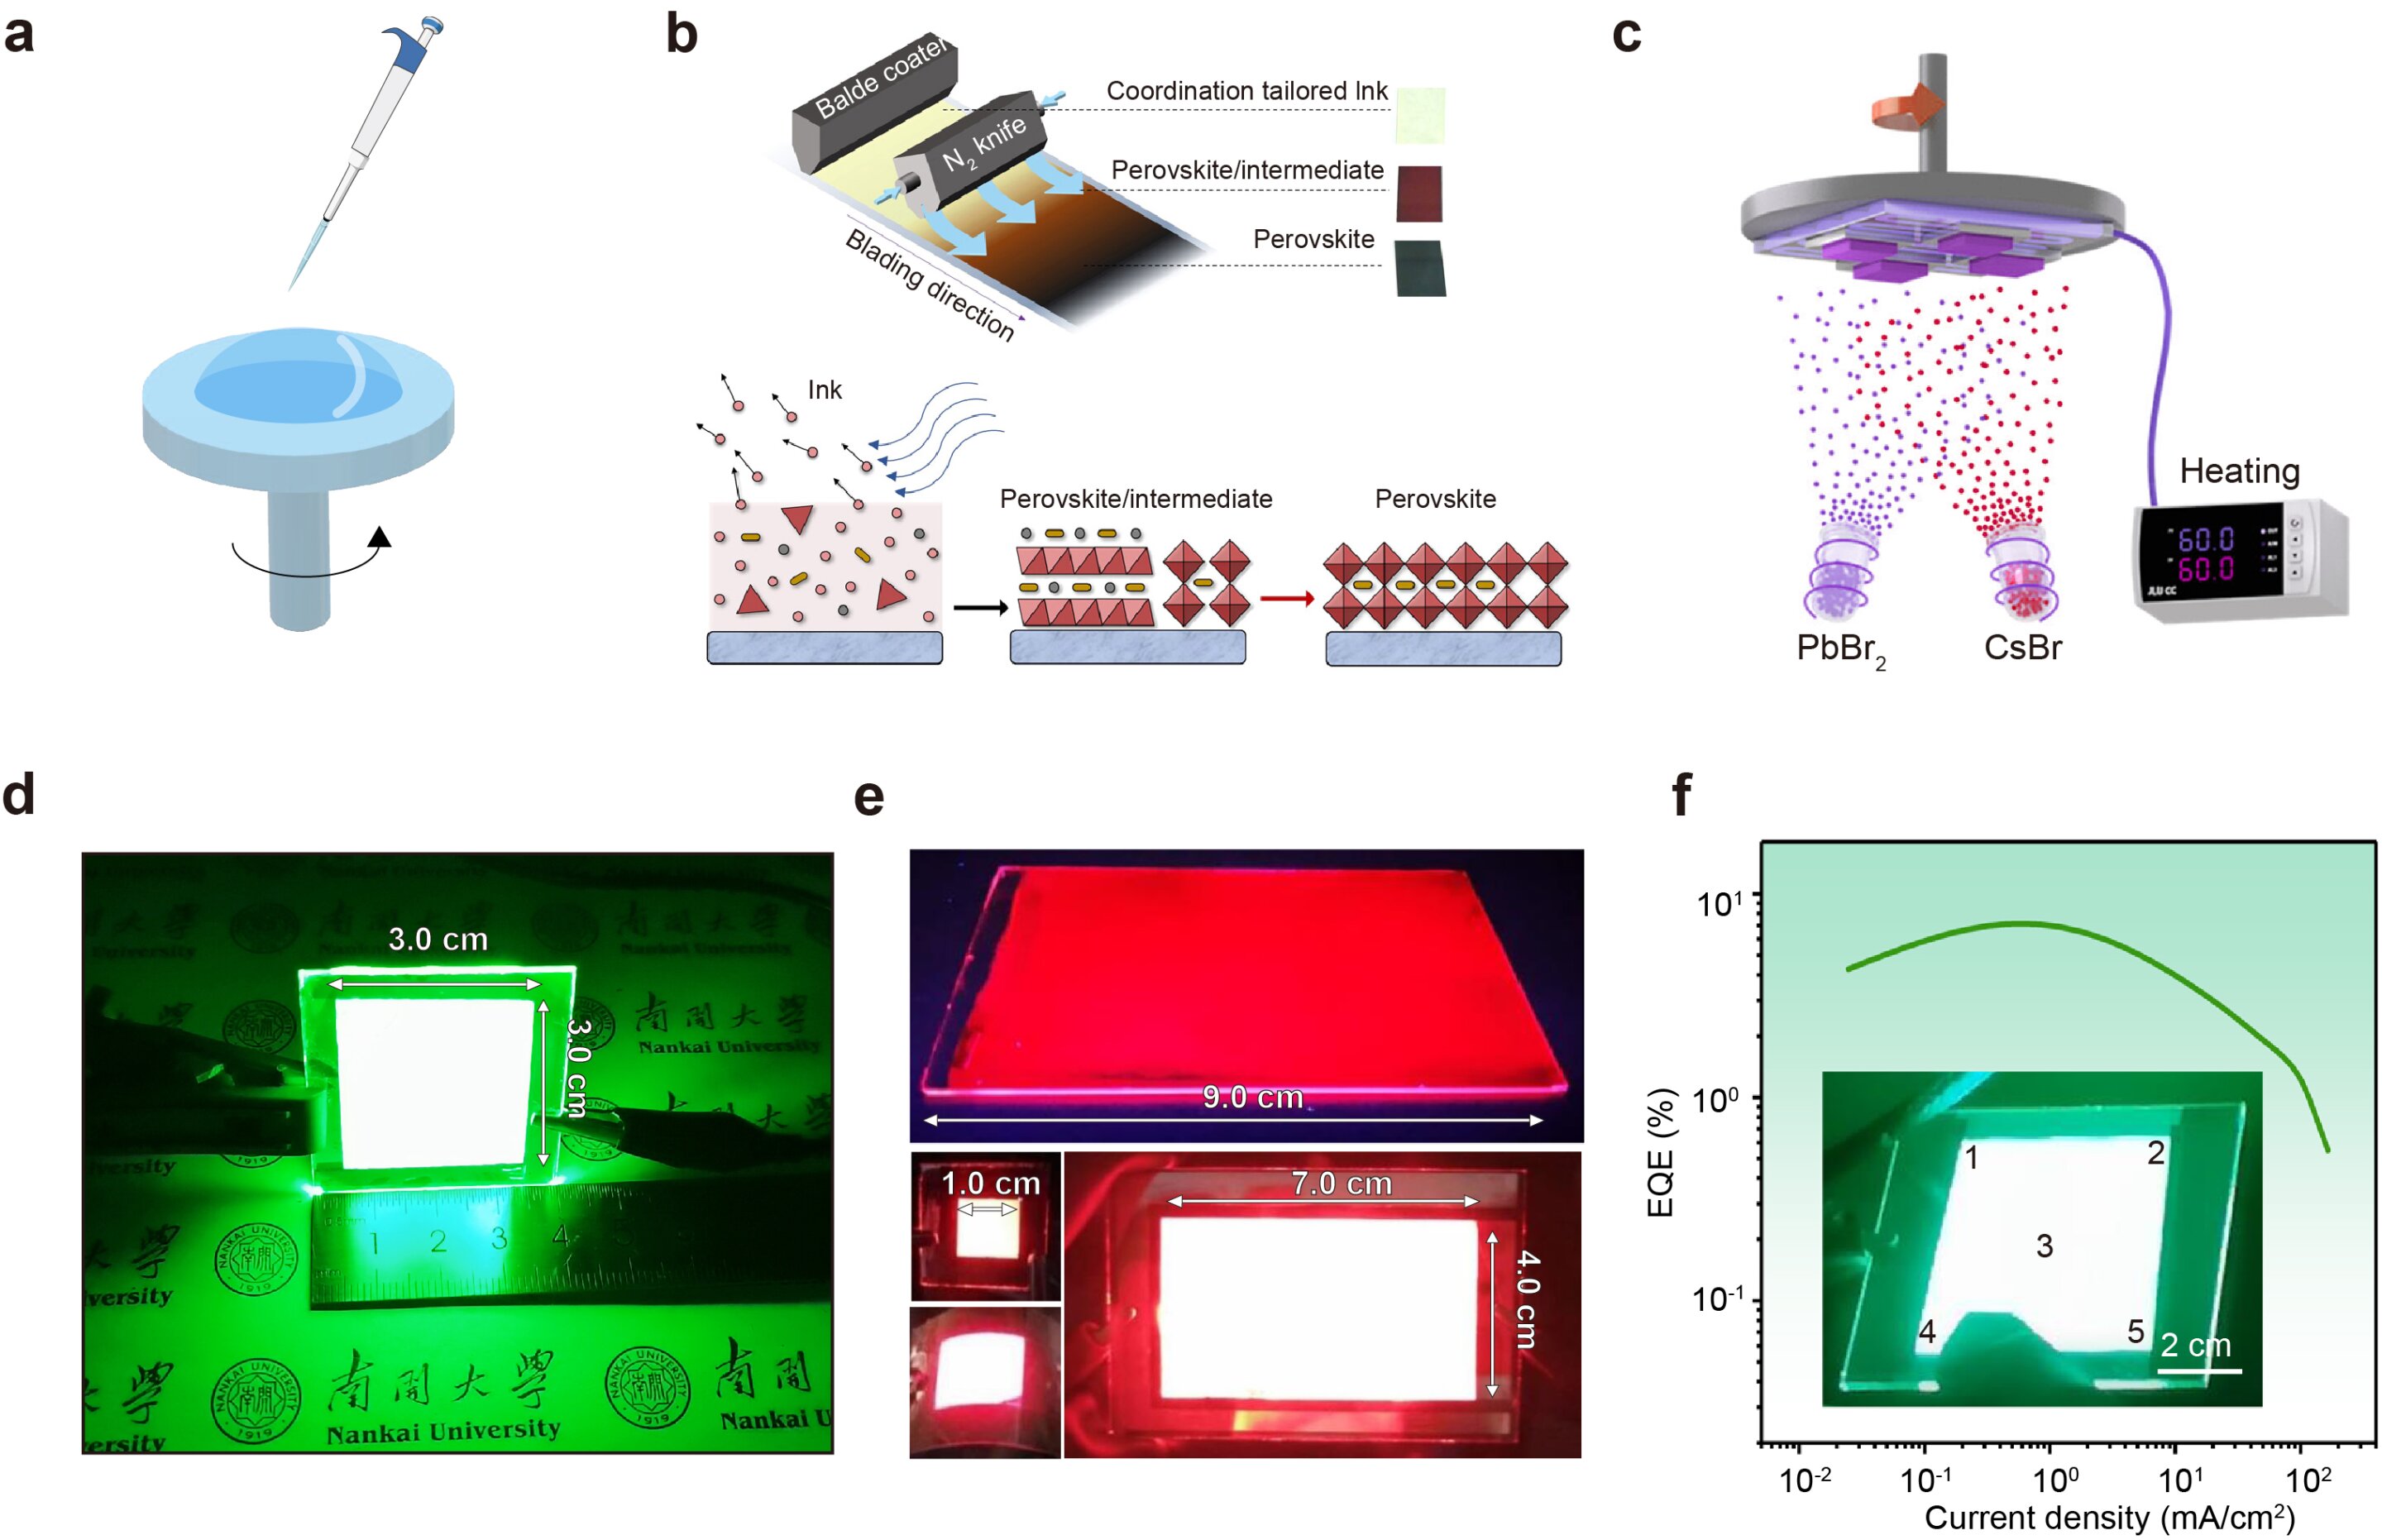 Perovskite light-emitting diodes toward commercial full-color displays: Progress and key technical obstacles